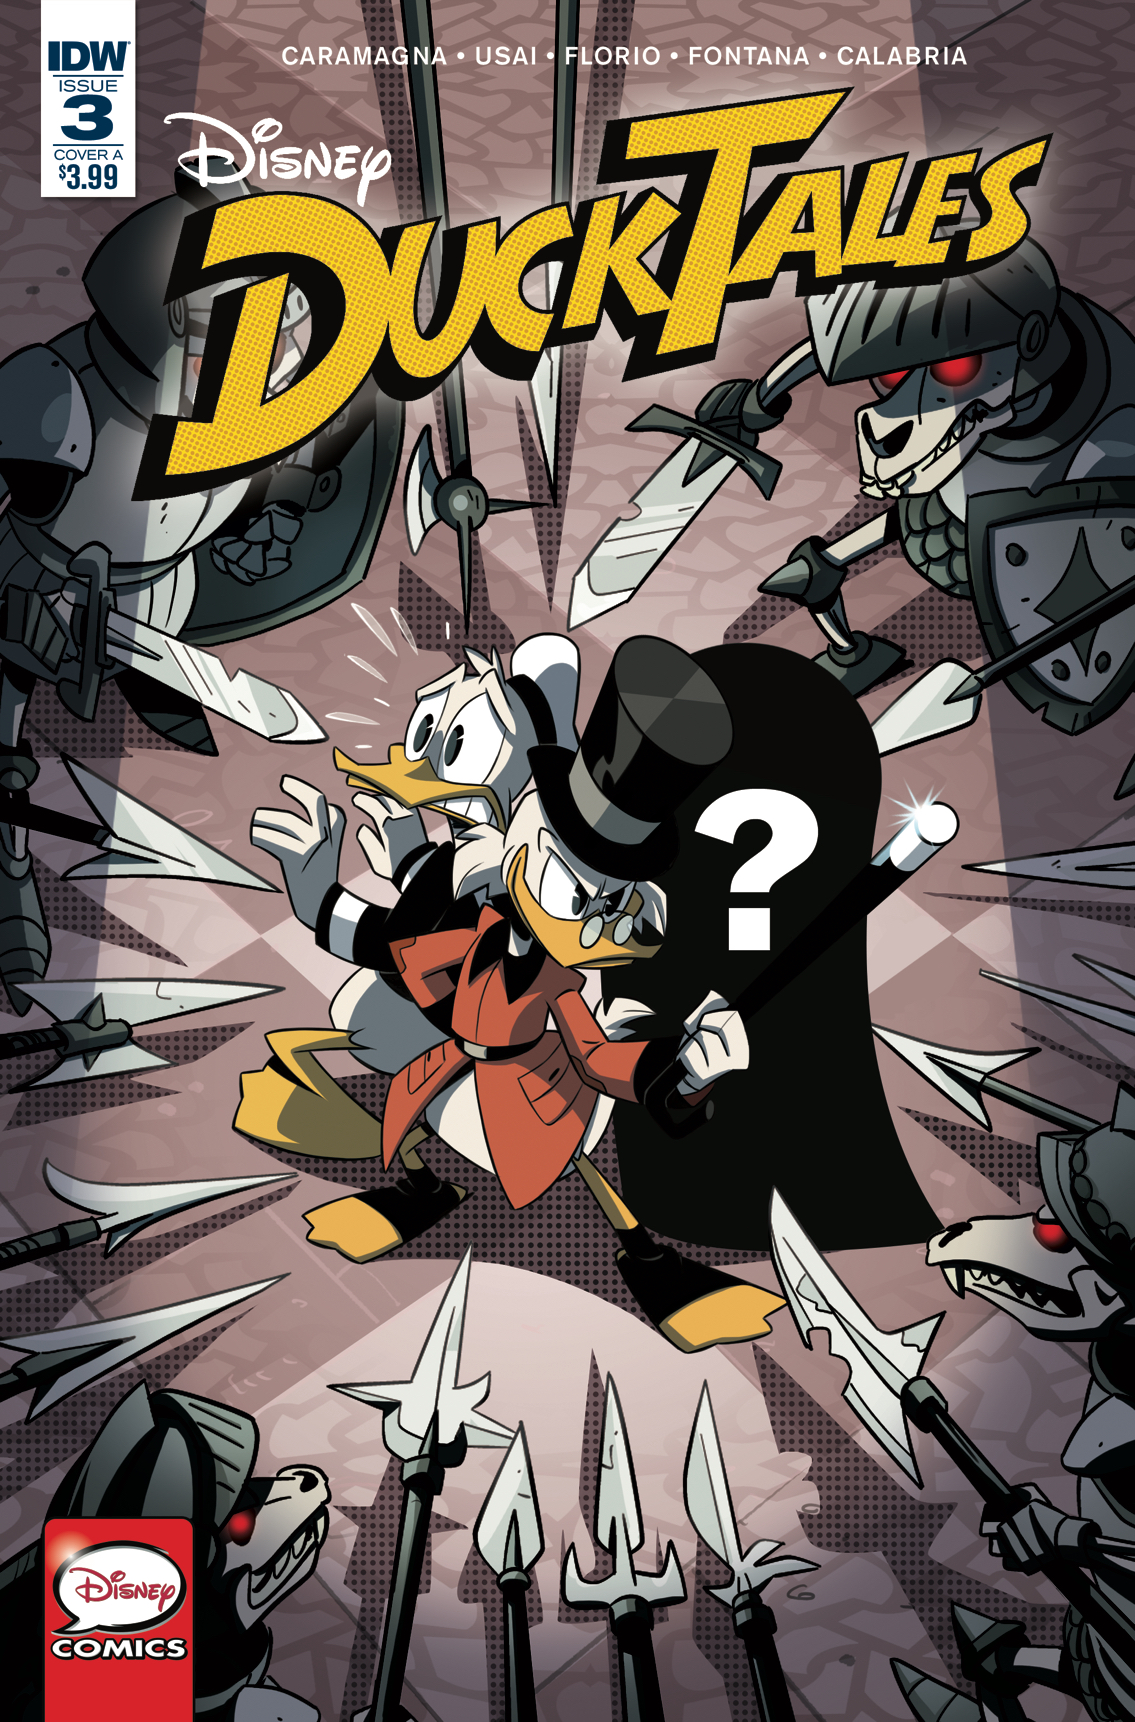 DuckTales - Issue 3 - Cover A - Prepublication